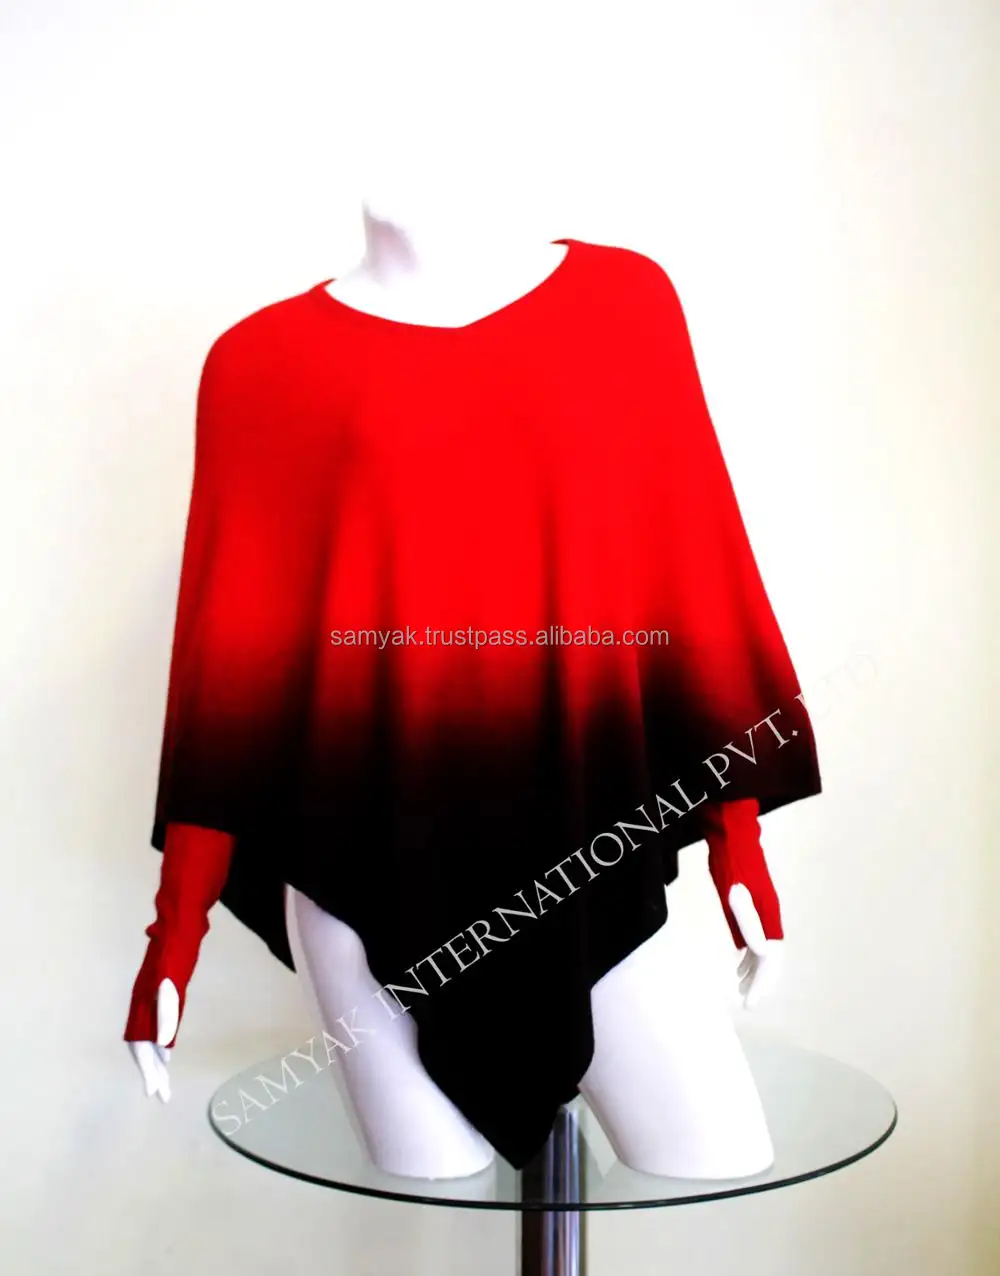 100% Pure Cashmere Poncho Shawls Women Spring Are Perfectly Warm PP-0001 Samyak NP